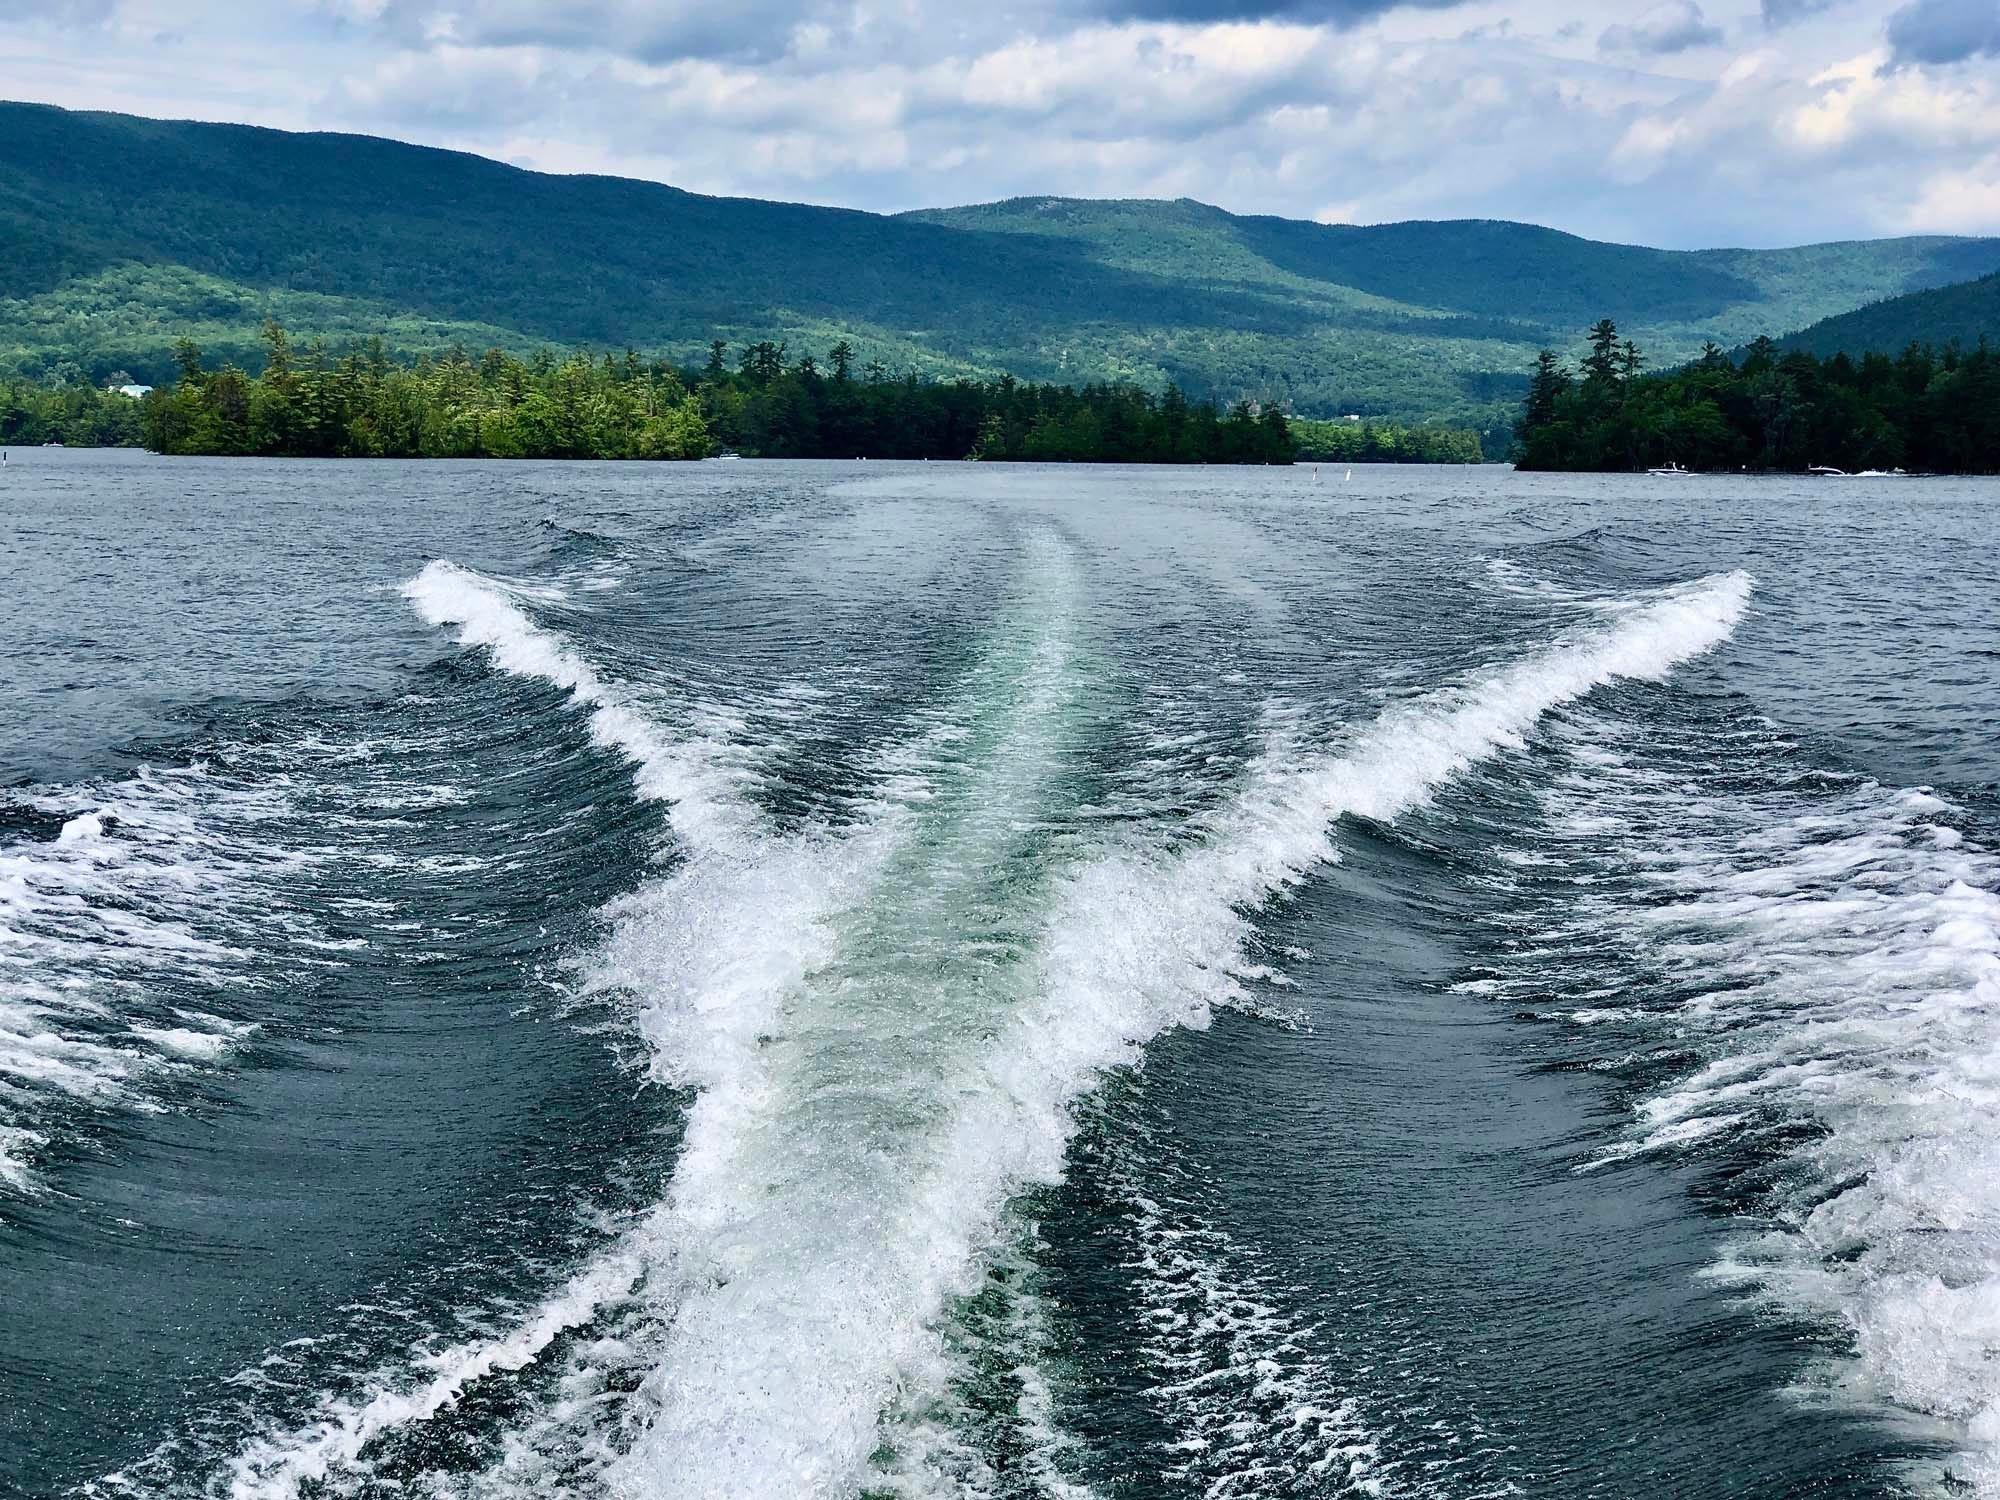 Experience Squam offers guided tours around Squam Lake, New Hampshire’s second largest lake. It